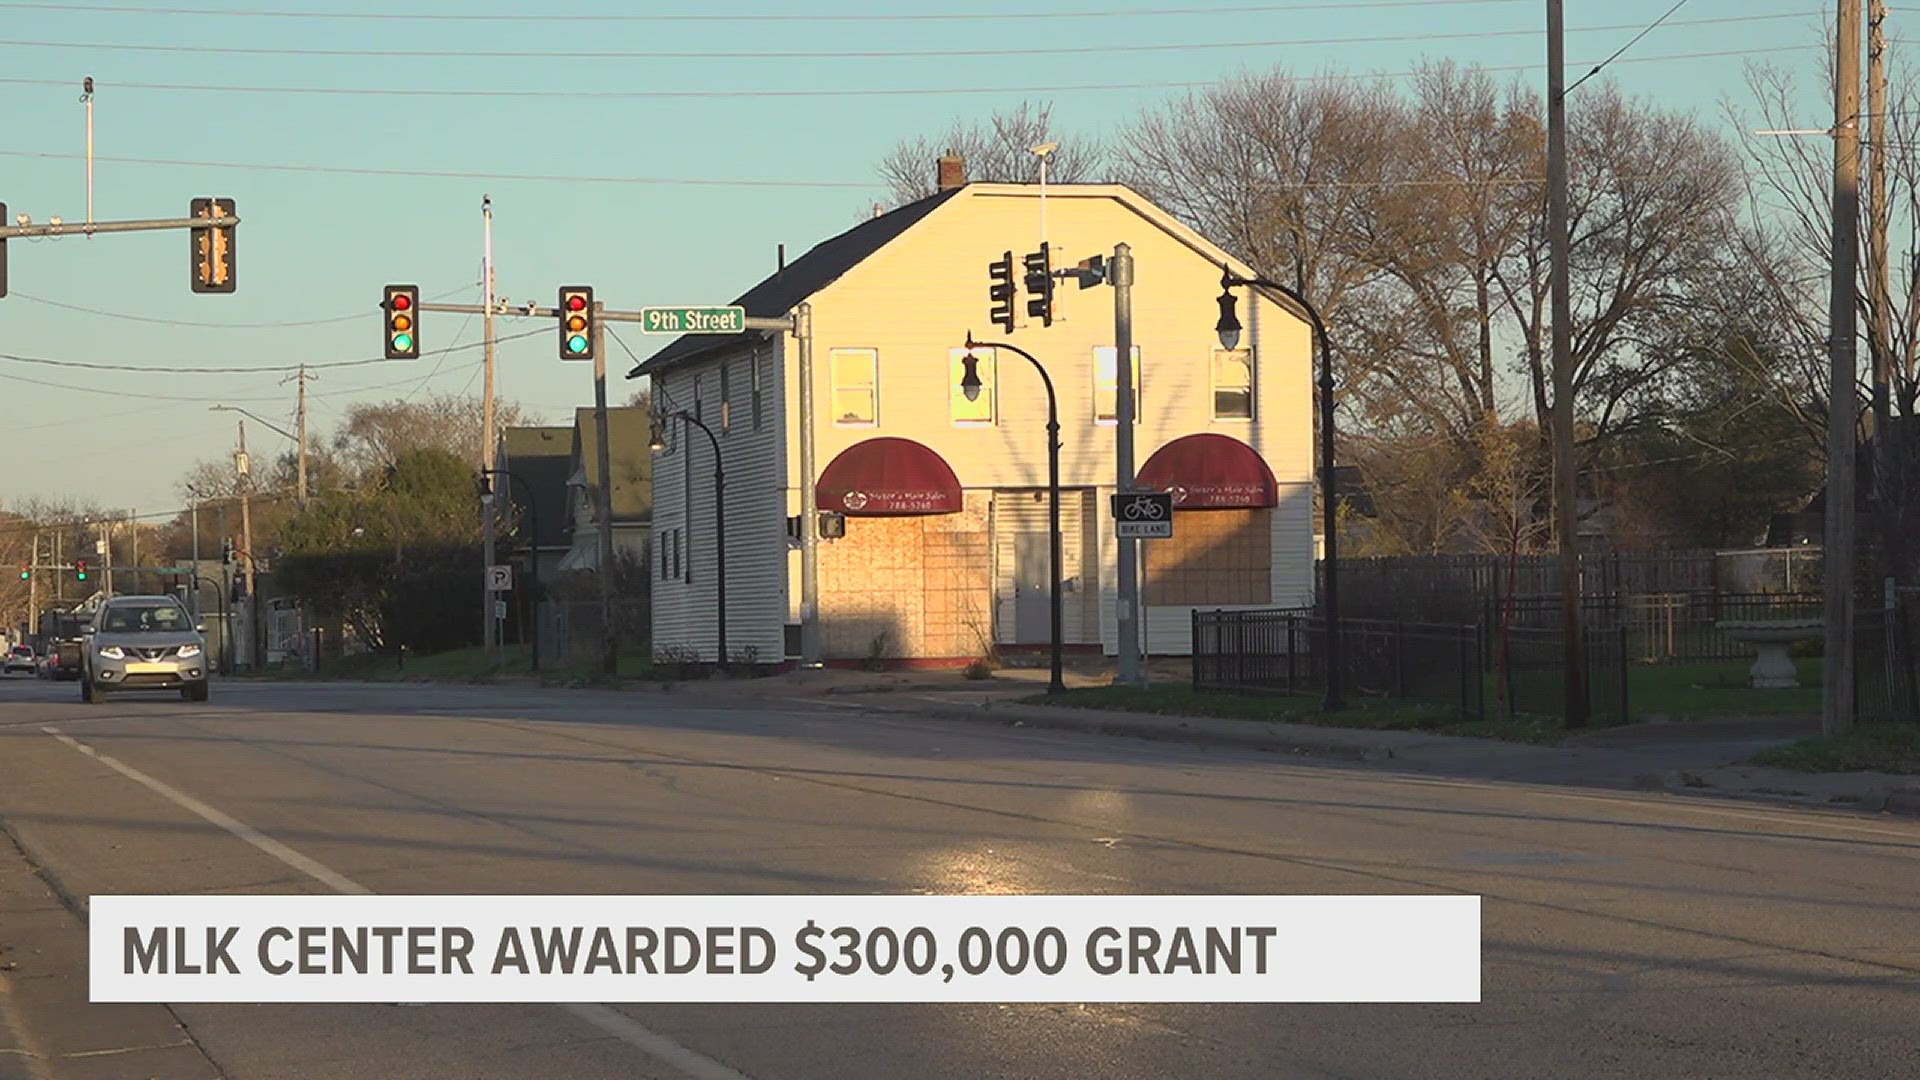 The Center will use the 3-year grant to continue building wealth, infrastructure & livability in Rock Island's West End as part of its revitalization efforts.